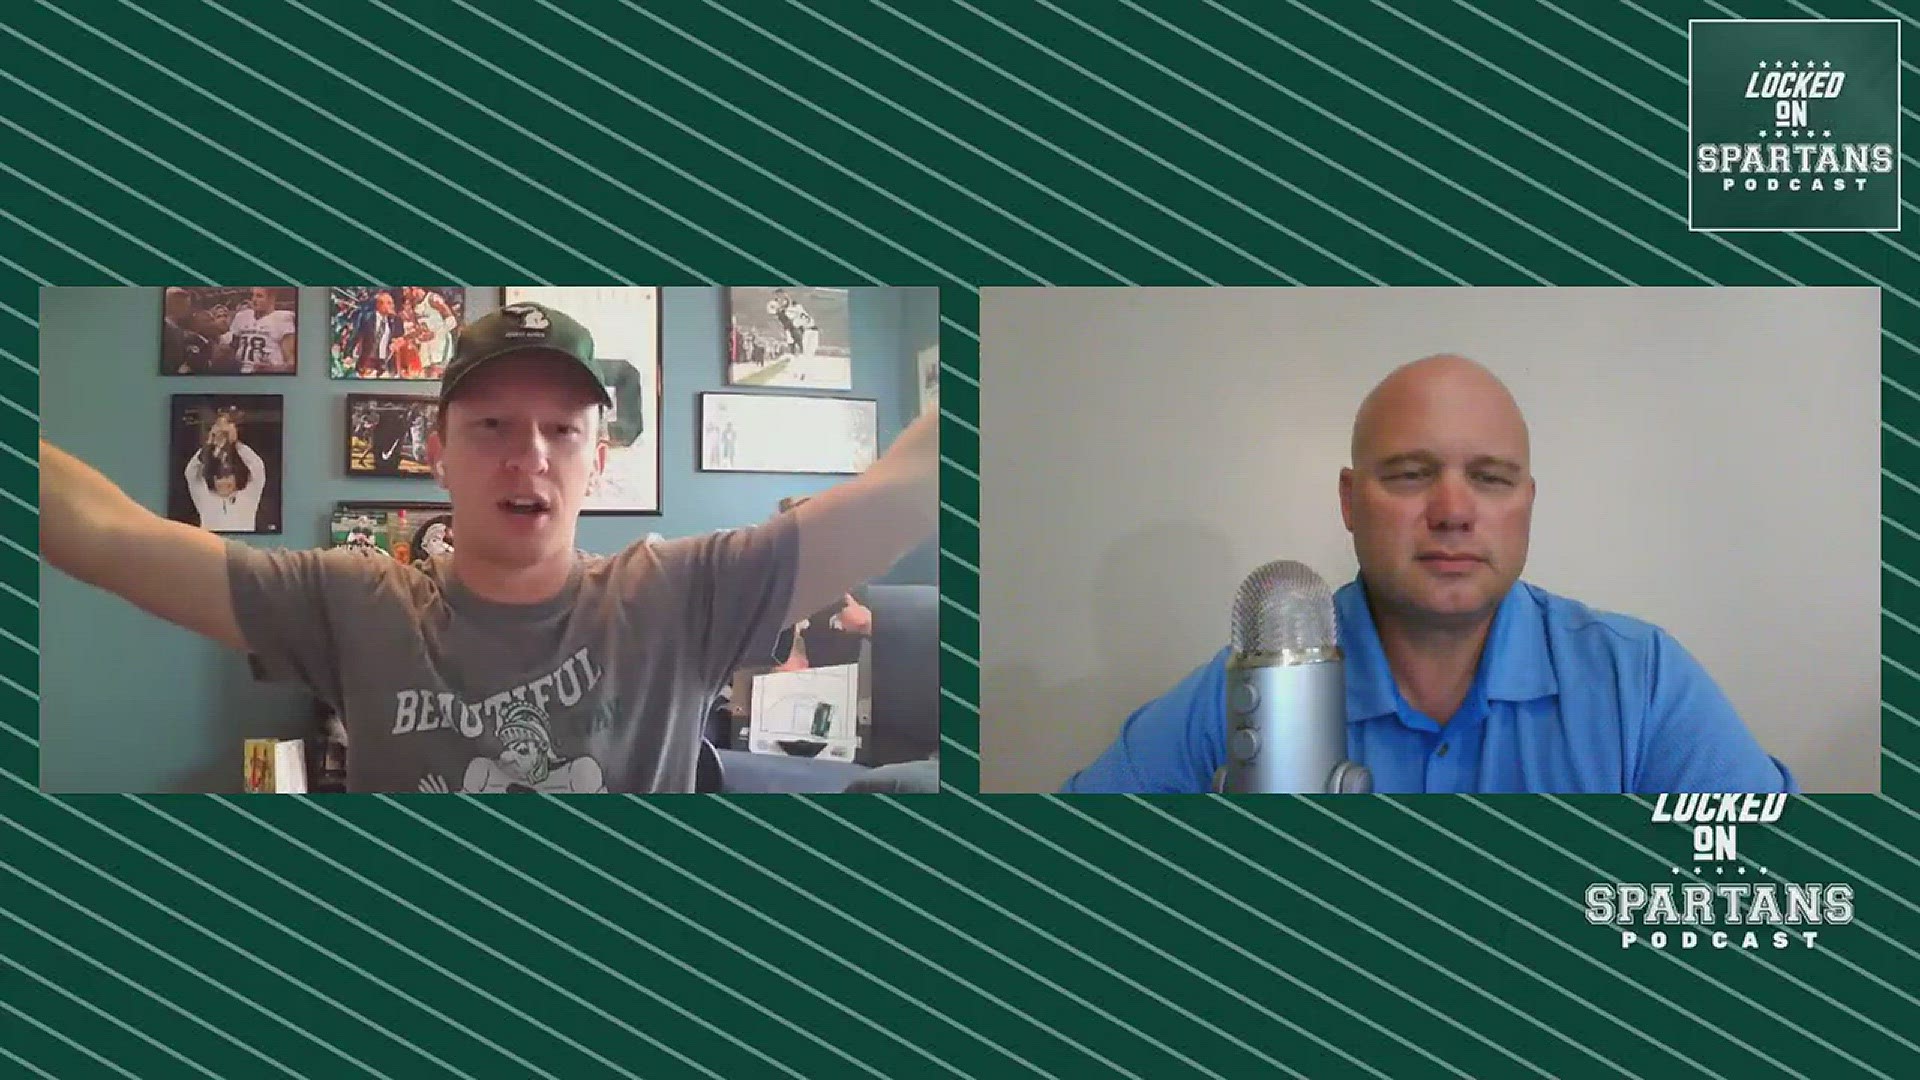 We are joined by Locked On college football recruiting expert Brian Smith ahead of a big official visit season for MSU football.